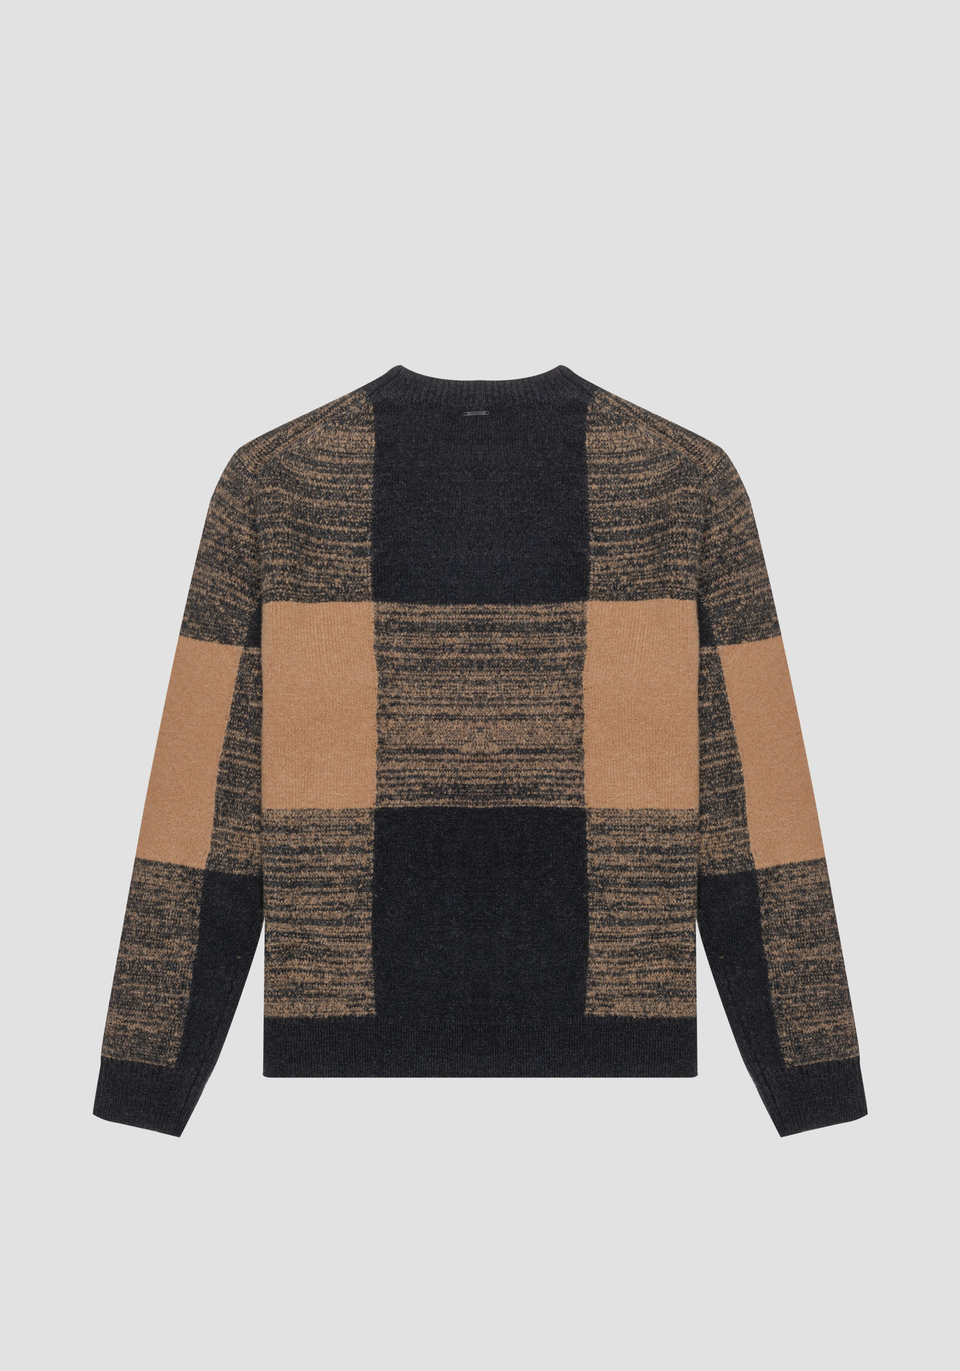 REGULAR FIT SWEATER IN MOHAIR BLEND YARN WITH JACQUARD 	CHECK PATTERN - Antony Morato Online Shop